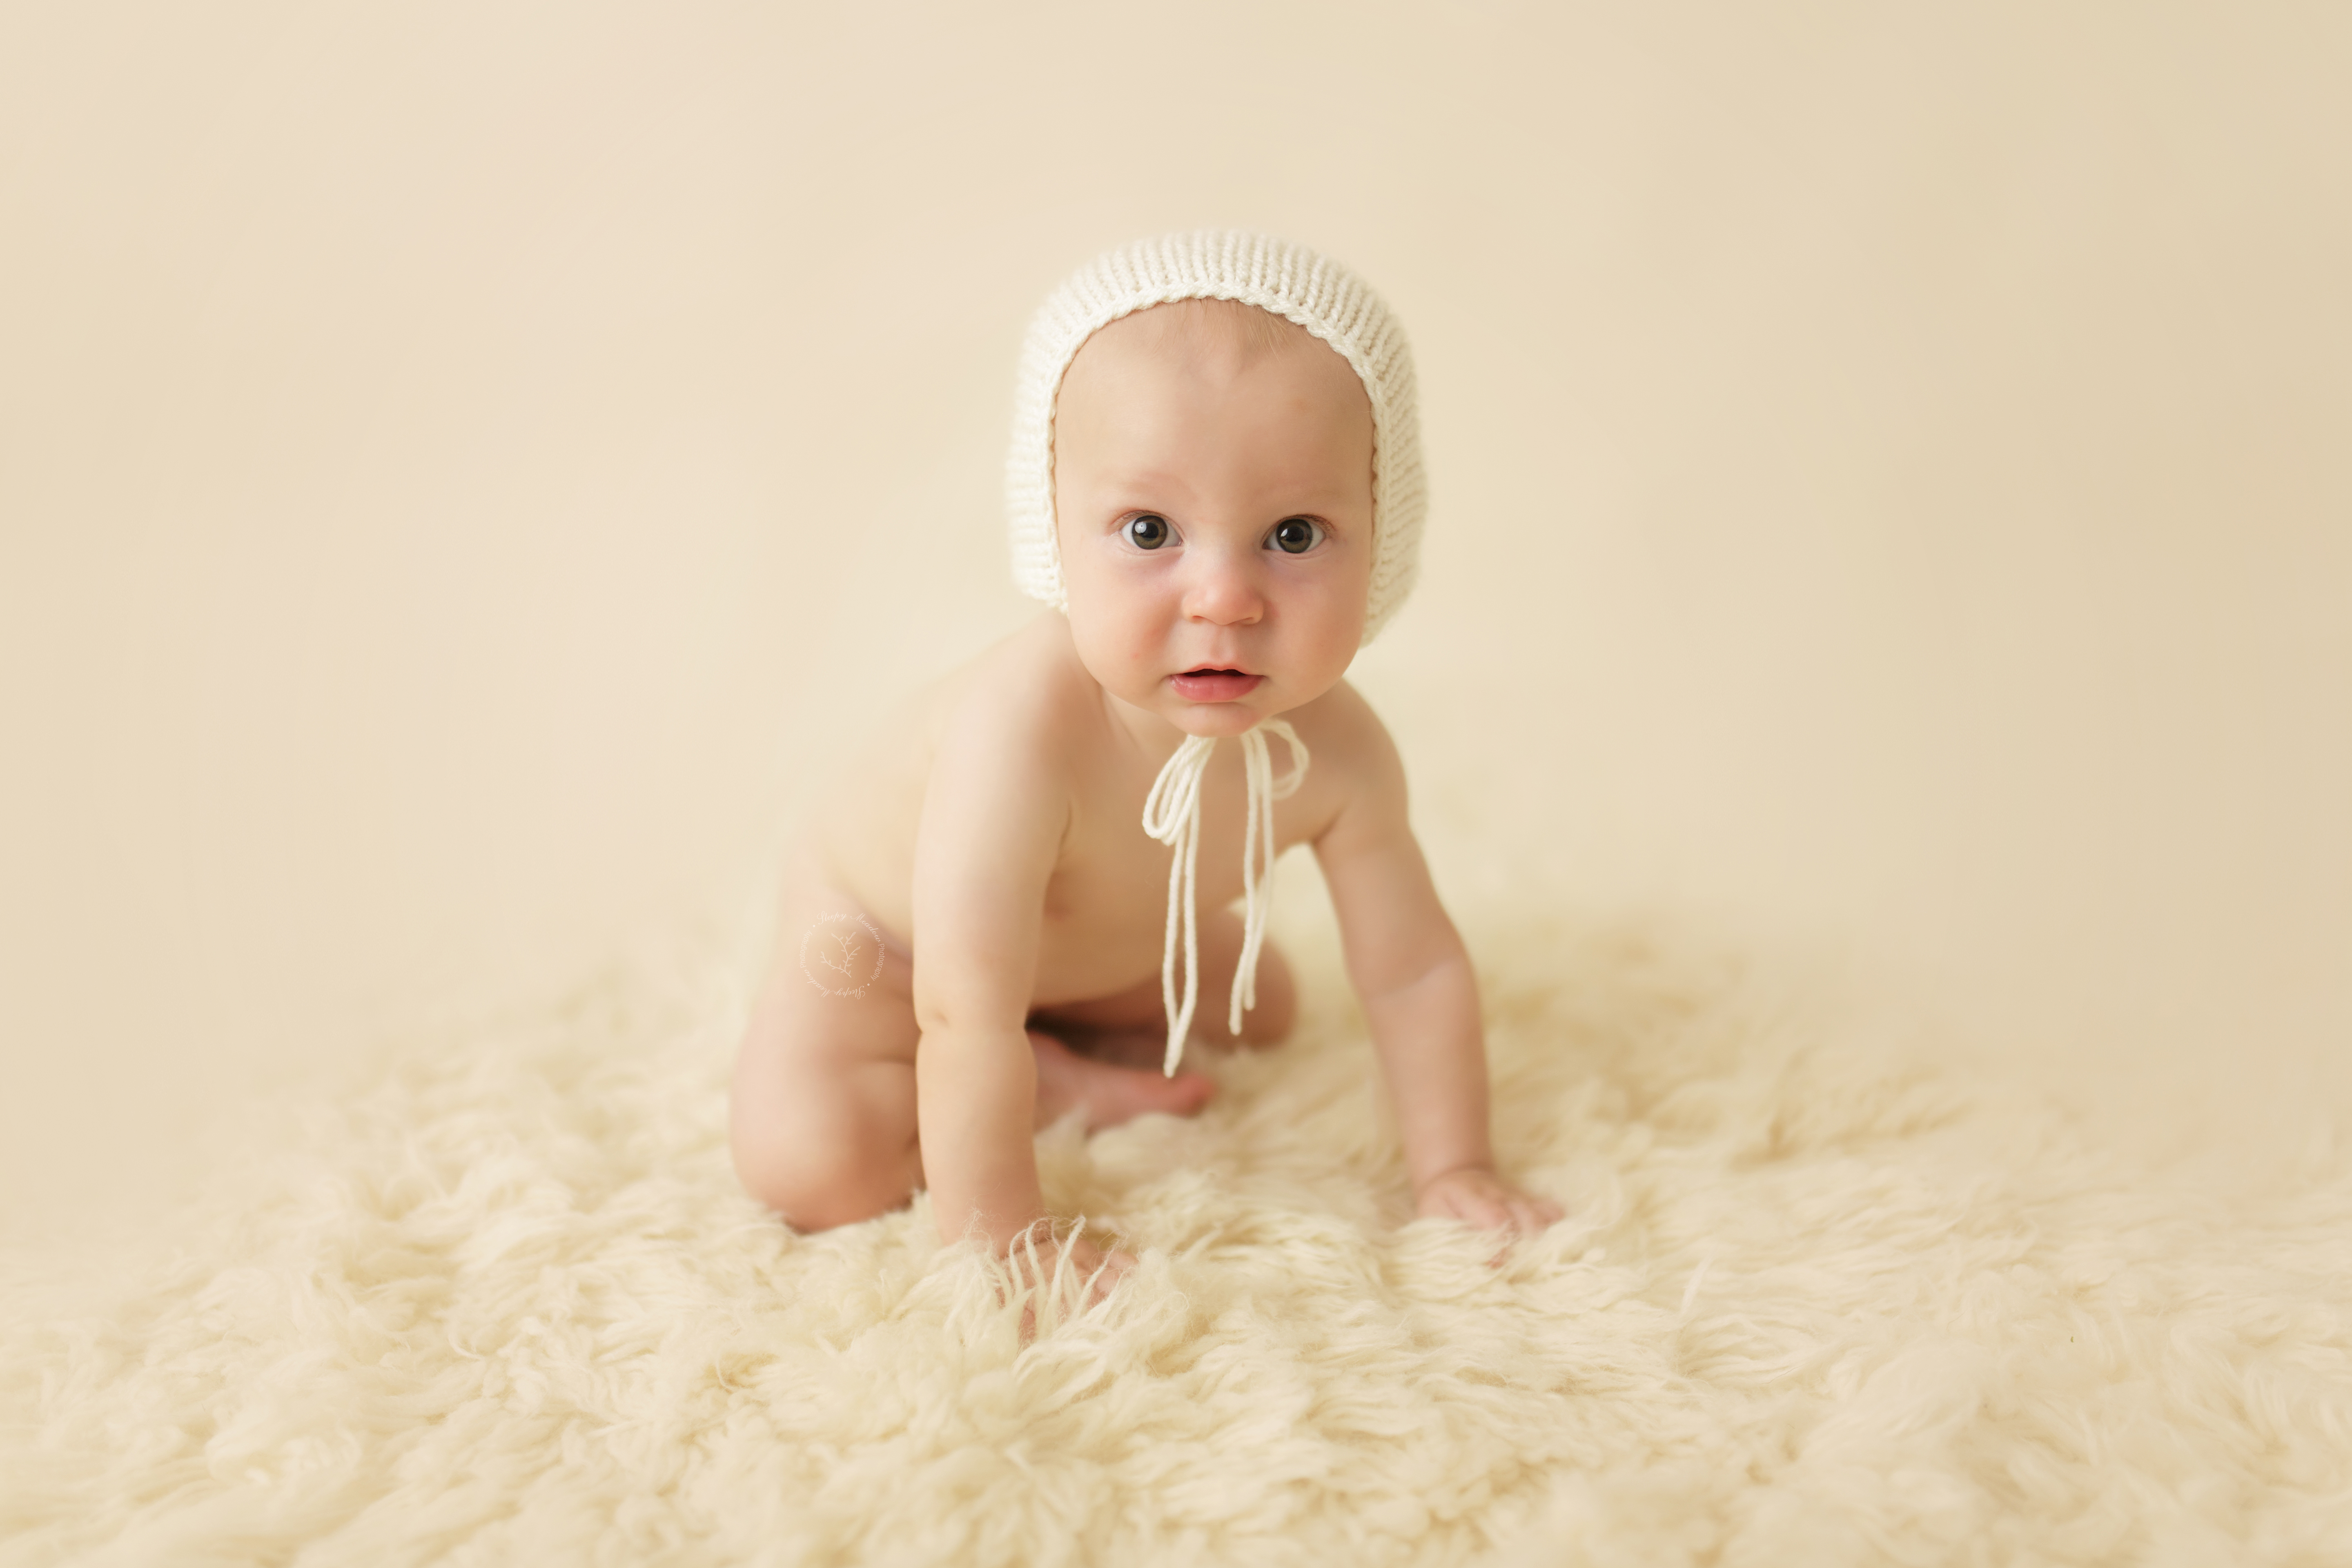 Cute baby boy photographed on cream flokati rug wearing a cream colored knit bonnet.